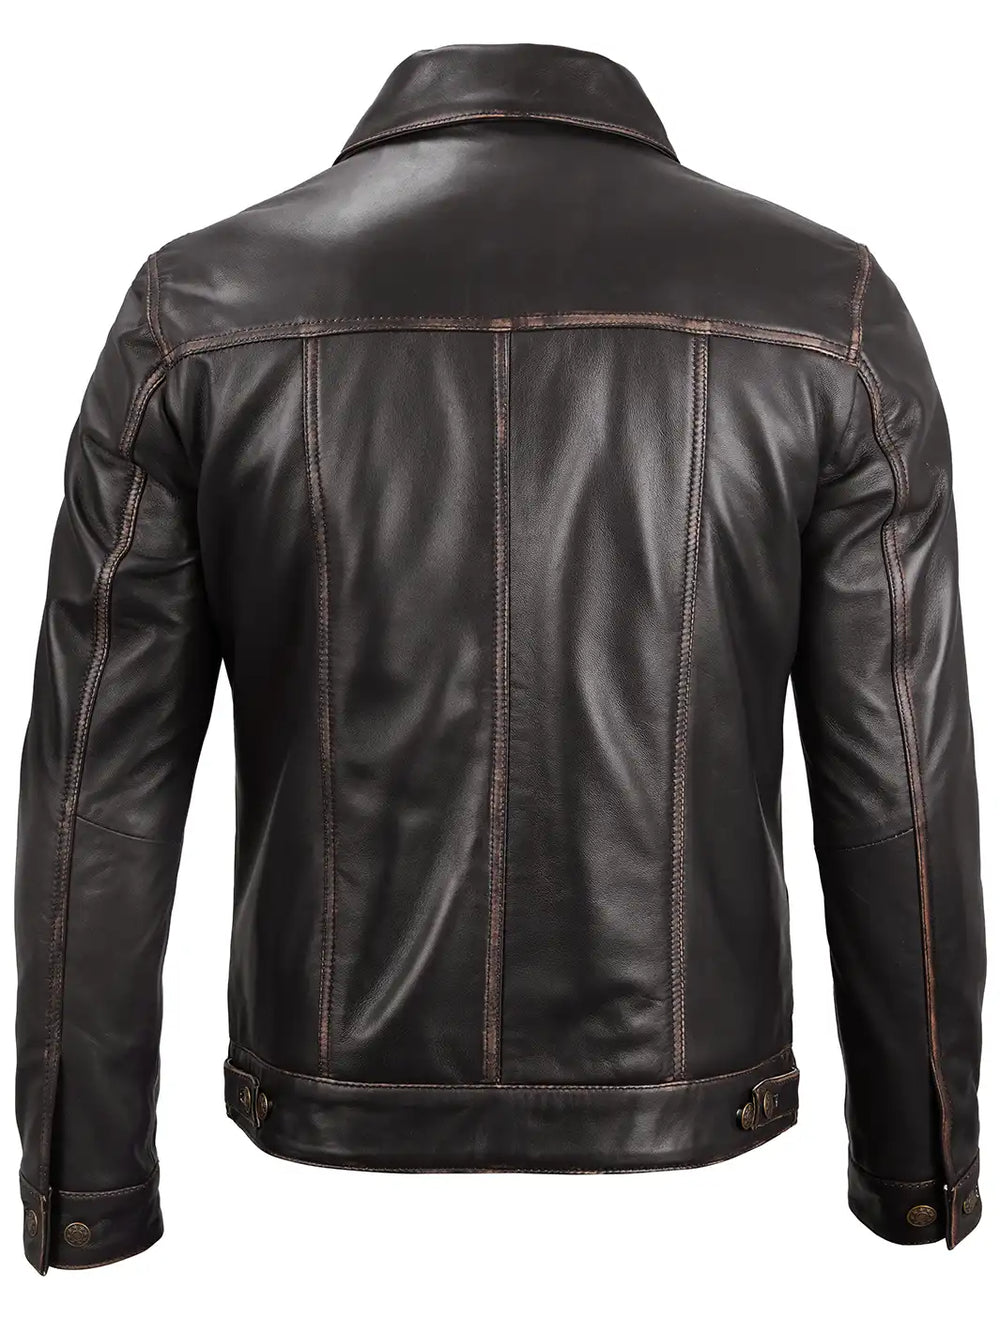 Mens real leather trucker jacket